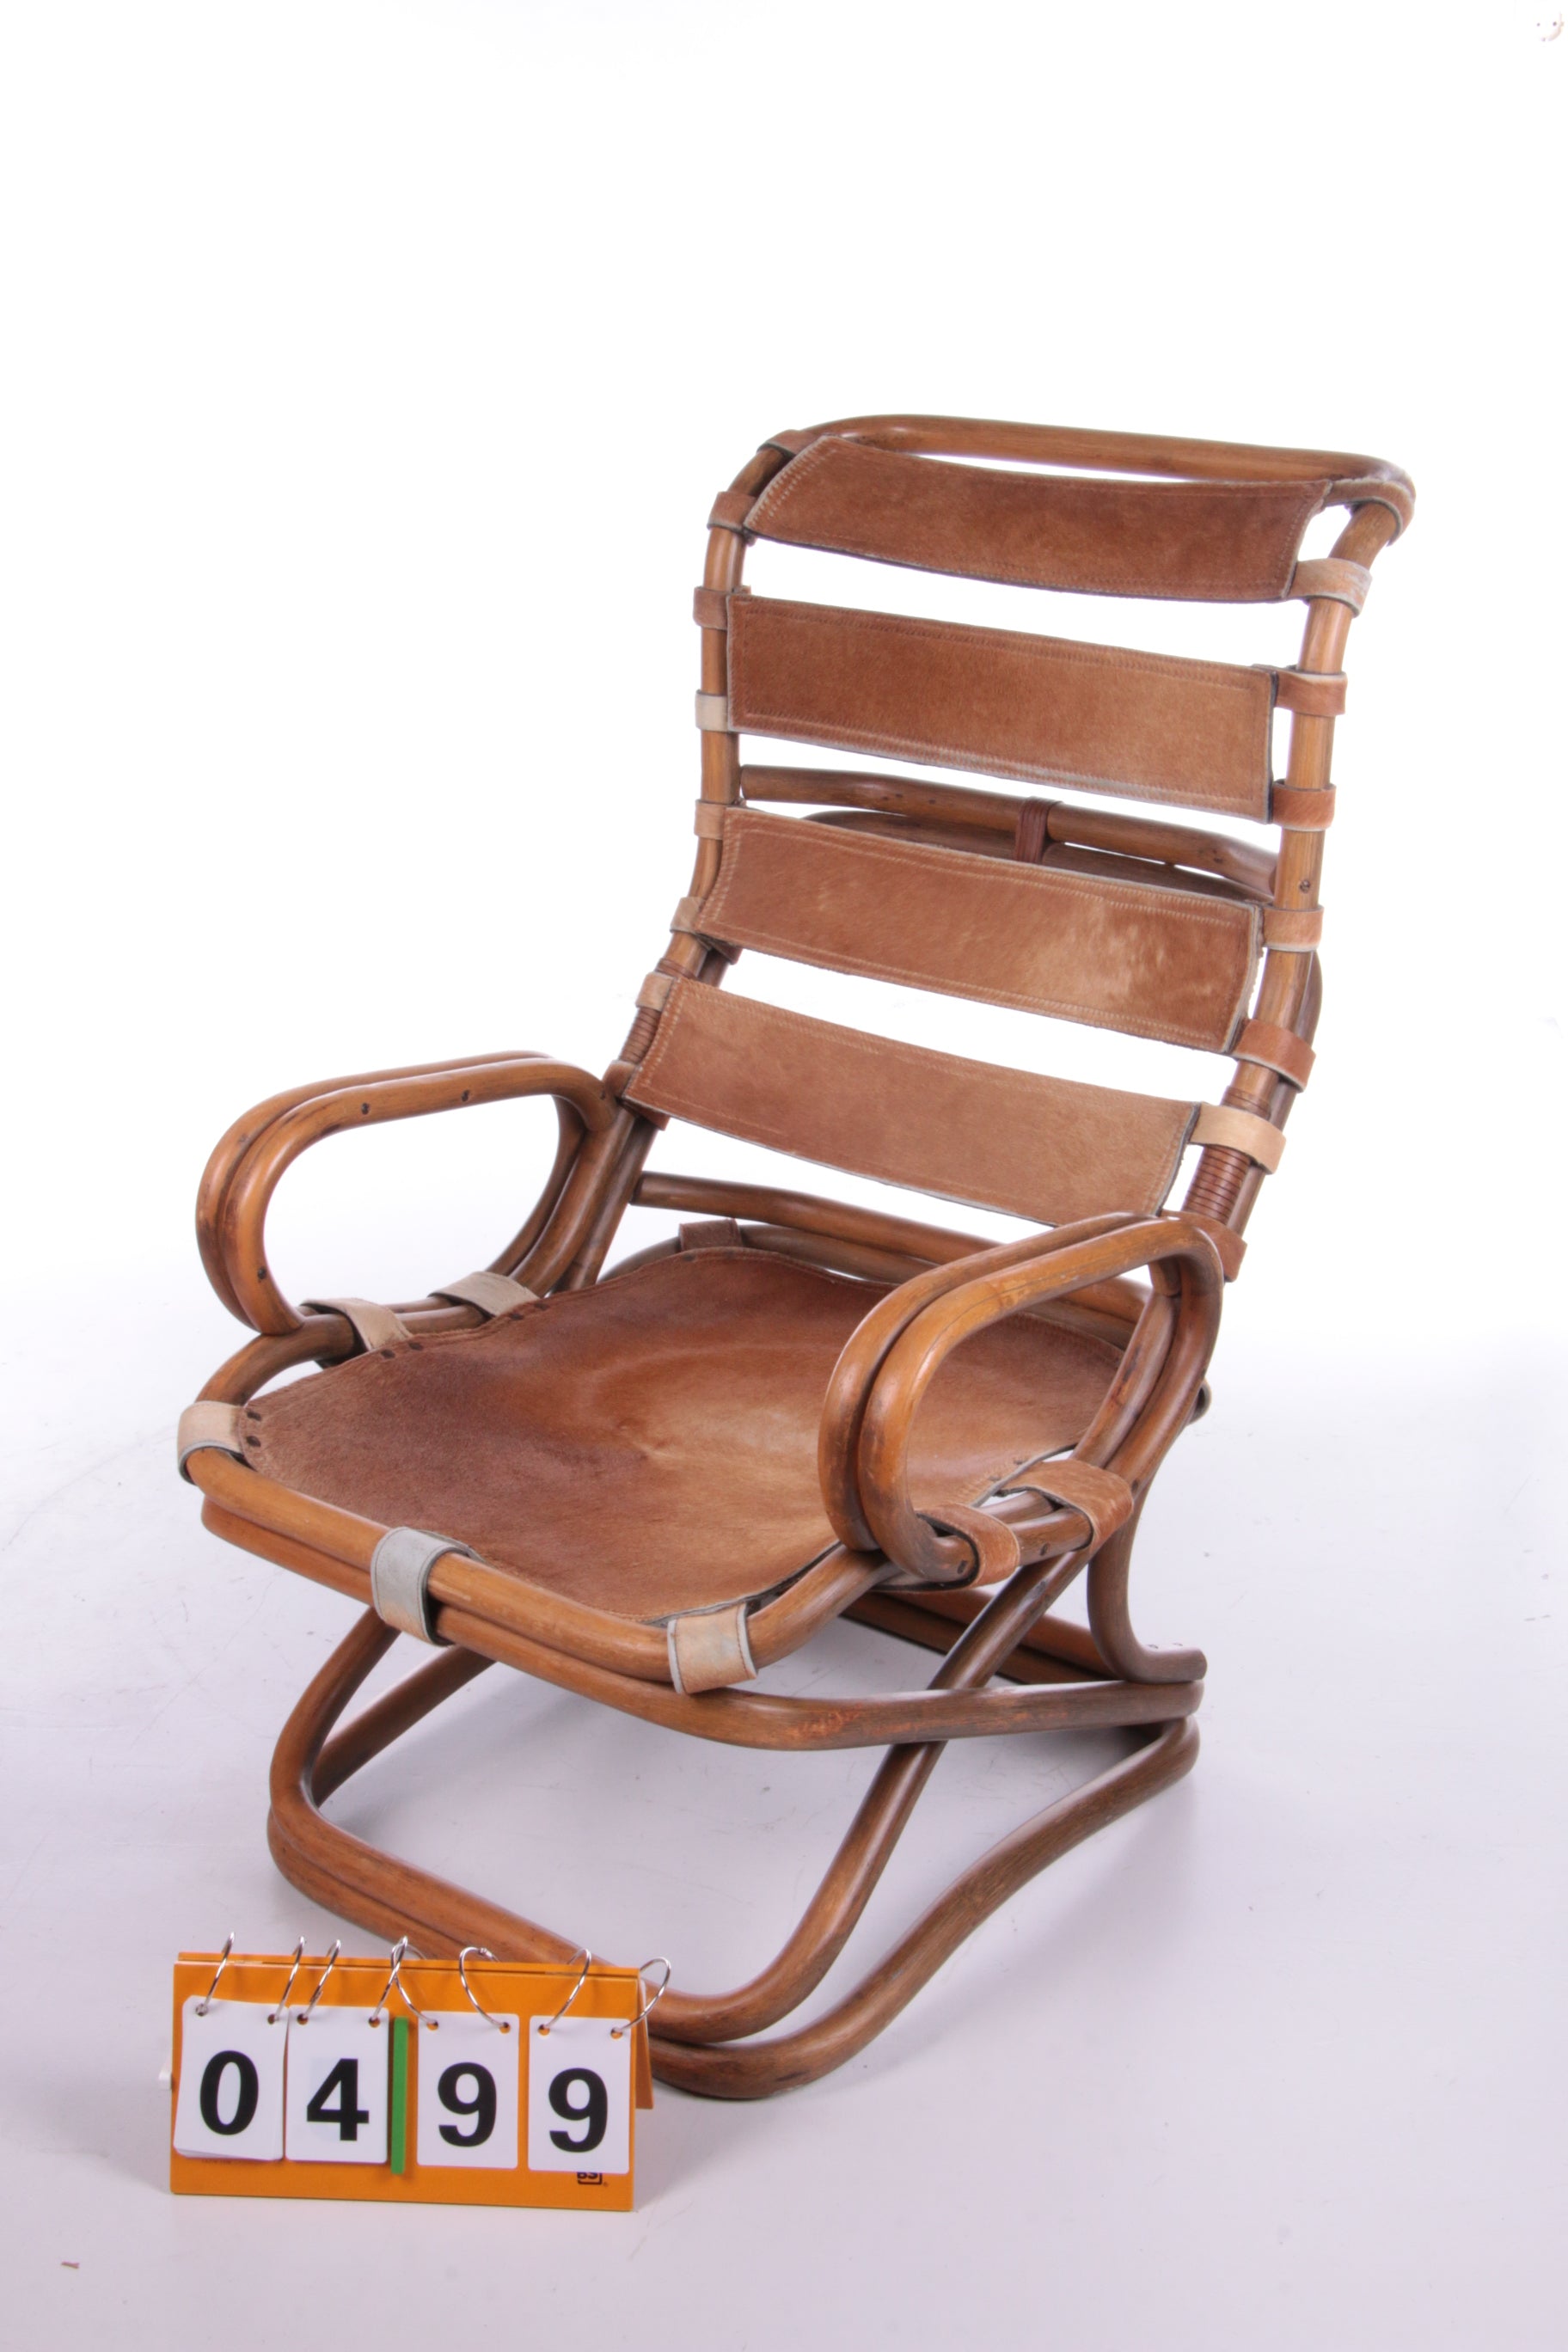 Tito Agnoli Relax chair made Bamboo and leather,1960s – Timeless-Art